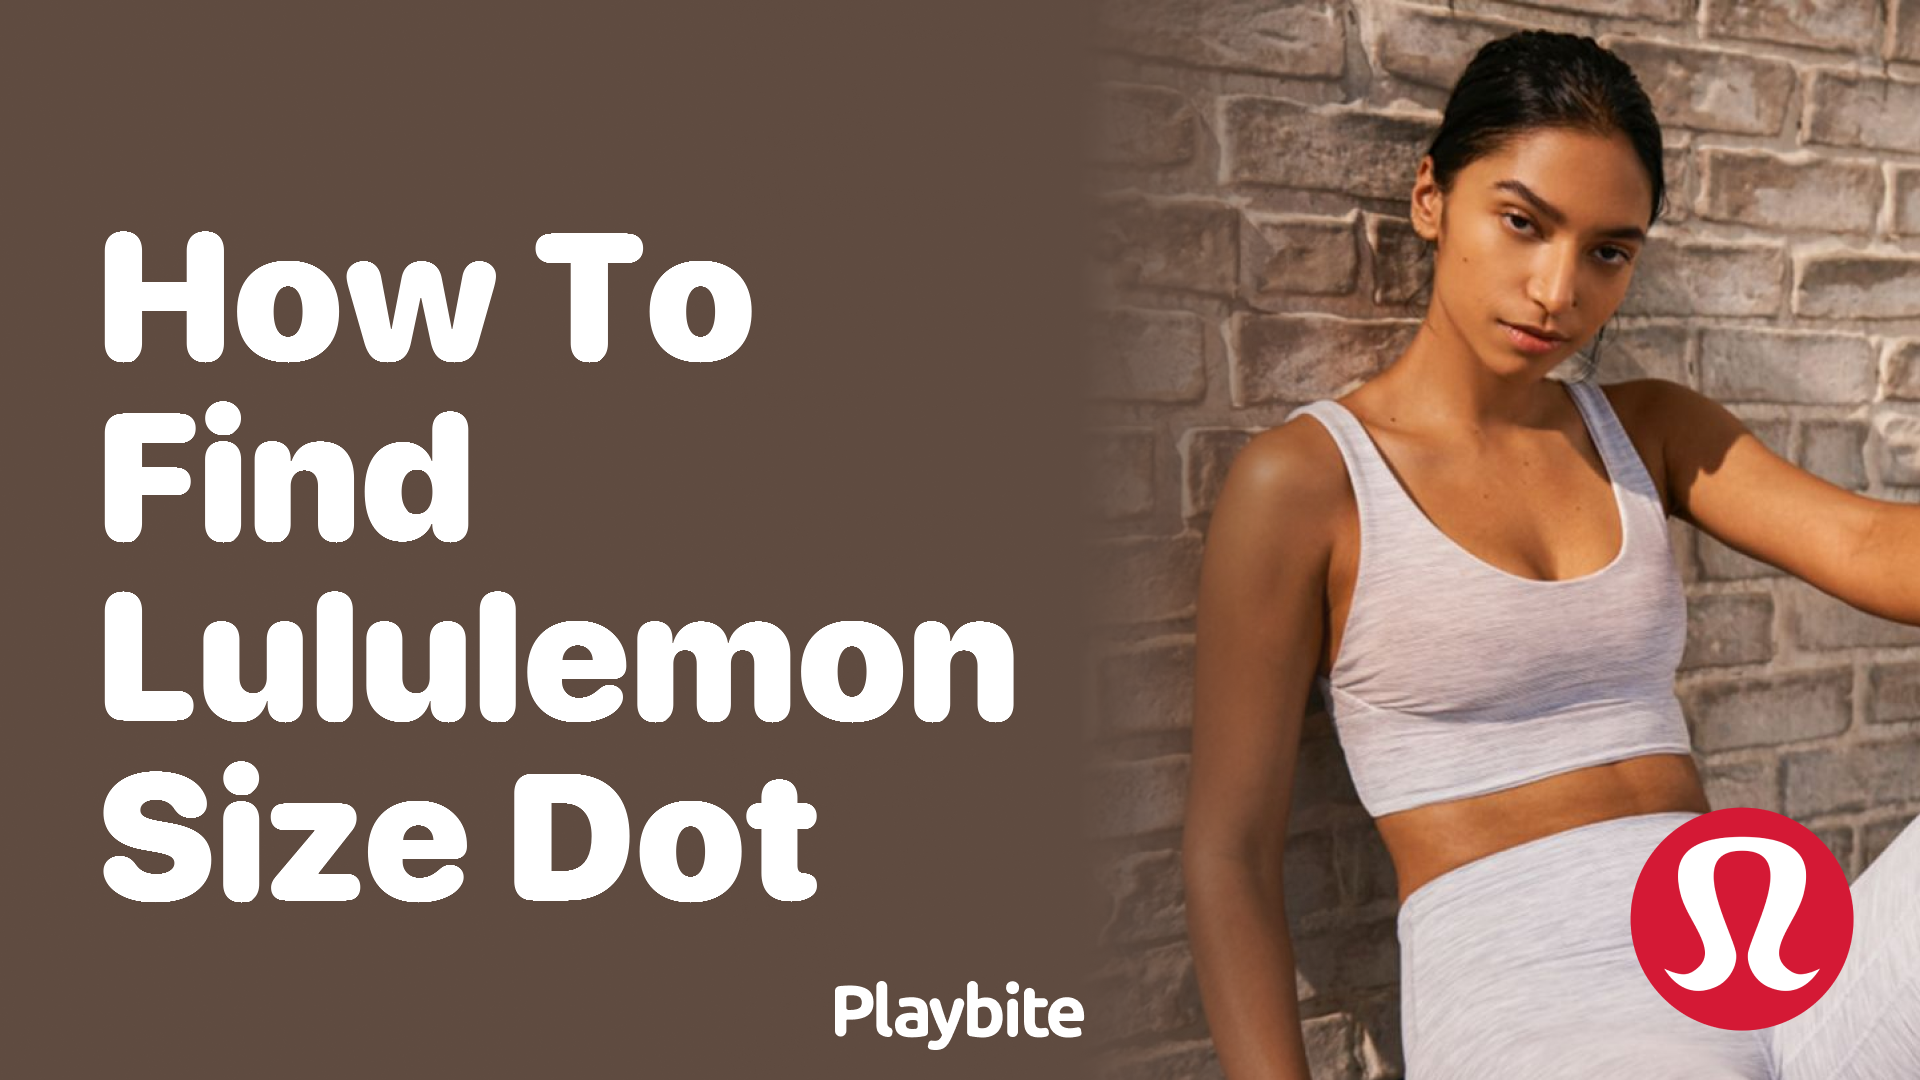 How to Find Lululemon Size Dot - Playbite